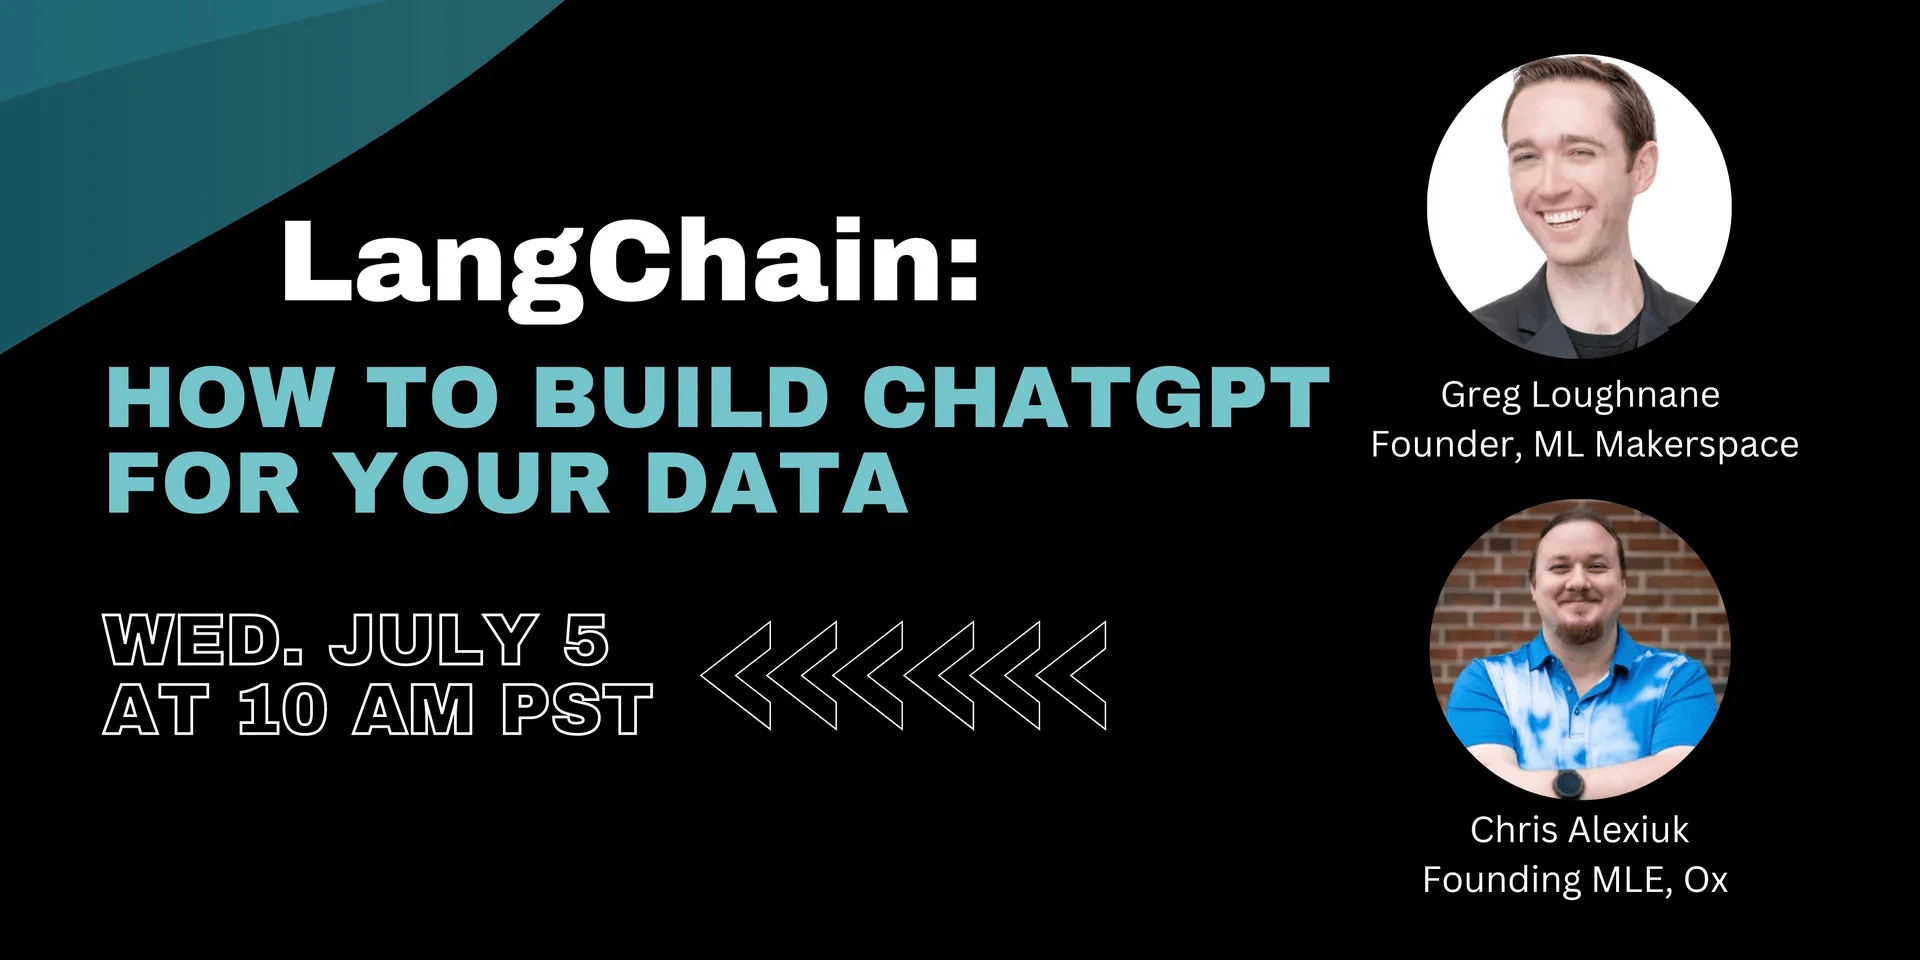 Workshop "LangChain: How to Build ChatGPT for Your Data"